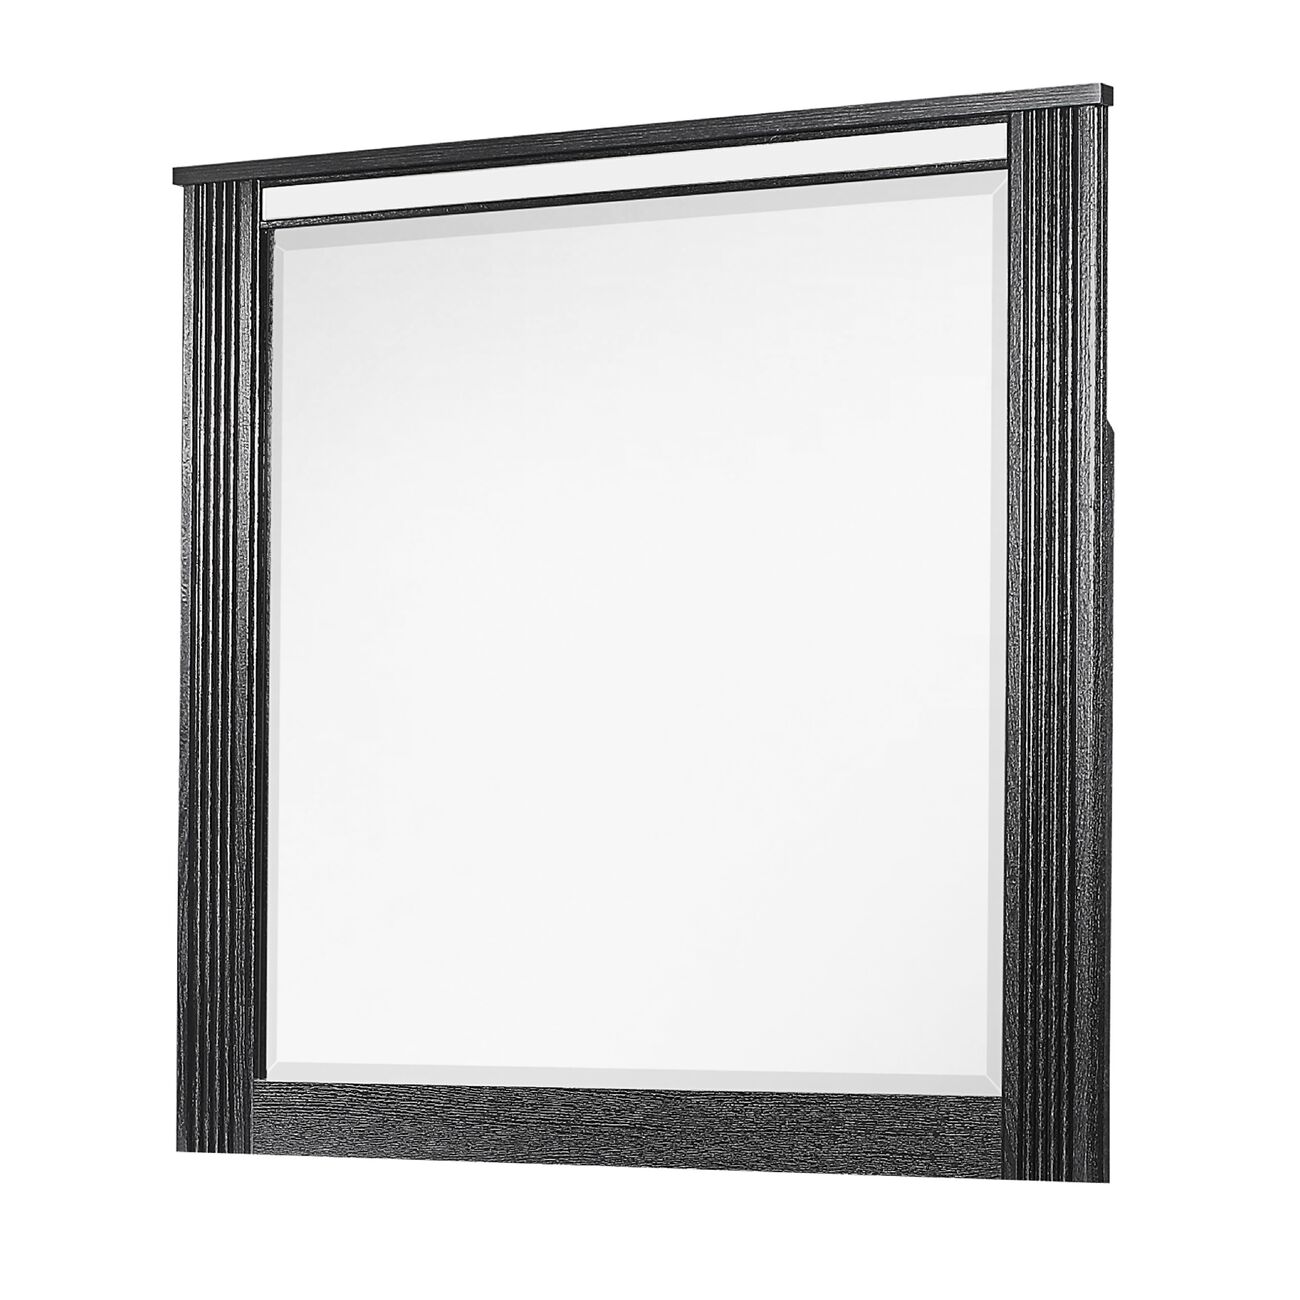 Rectangular Wooden Dresser Top Mirror with Ribbed Design, Black and Silver - BM215187